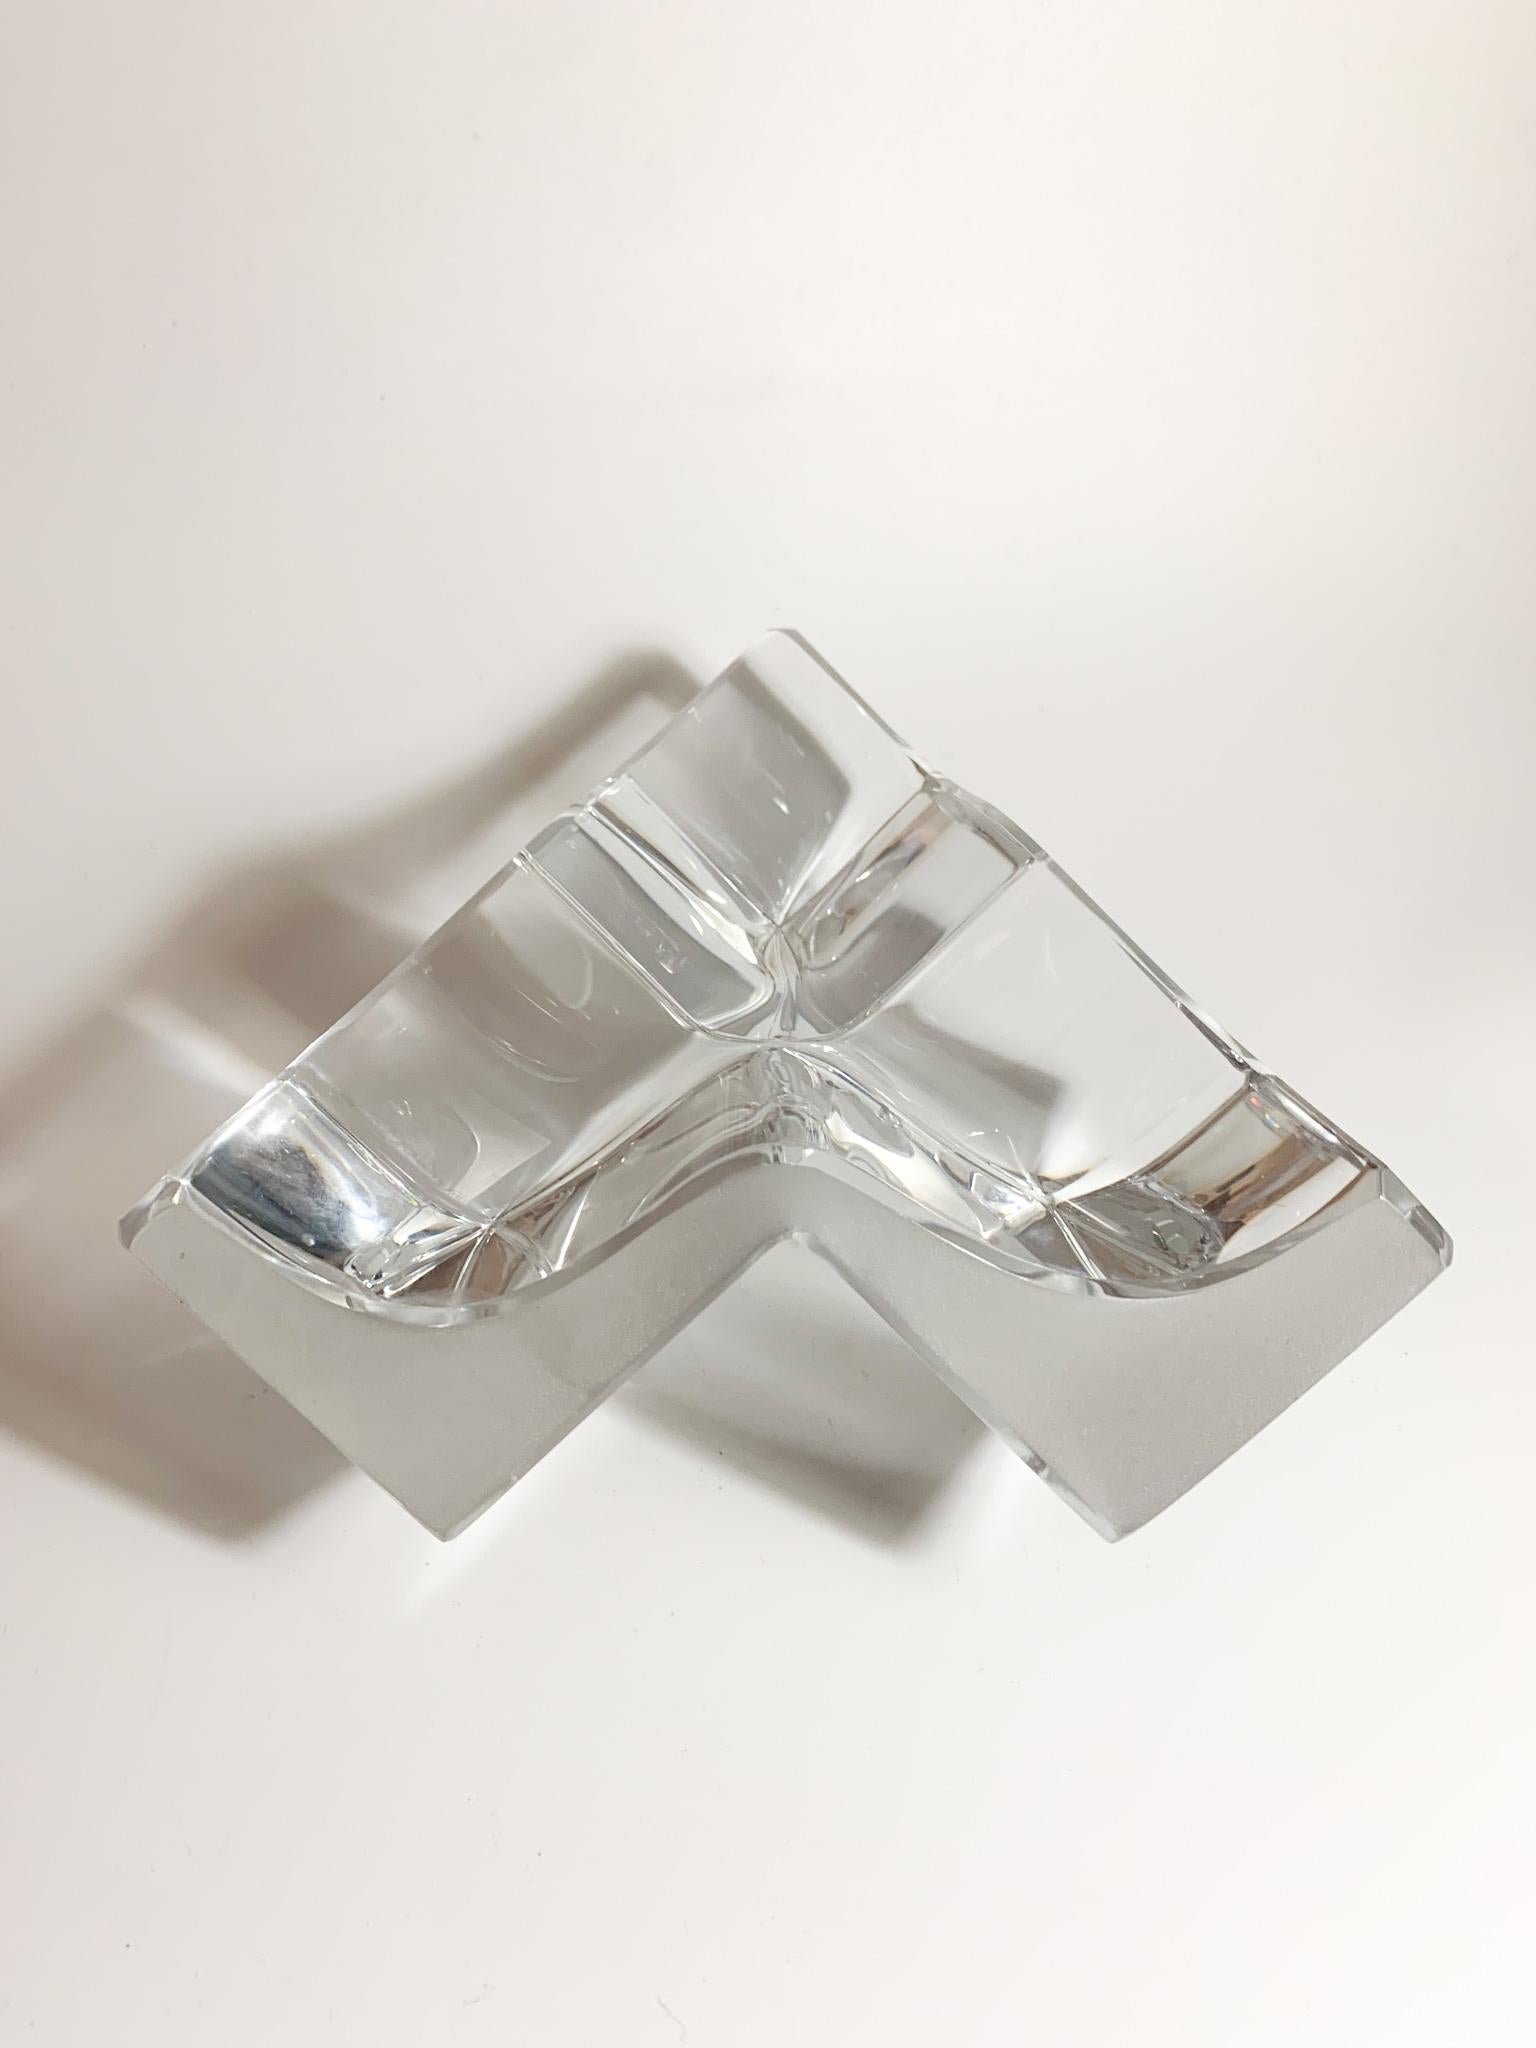 Mid-Century Modern Geometric Abstract Sculpture in Transparent Crystal by Daum from the, 70s